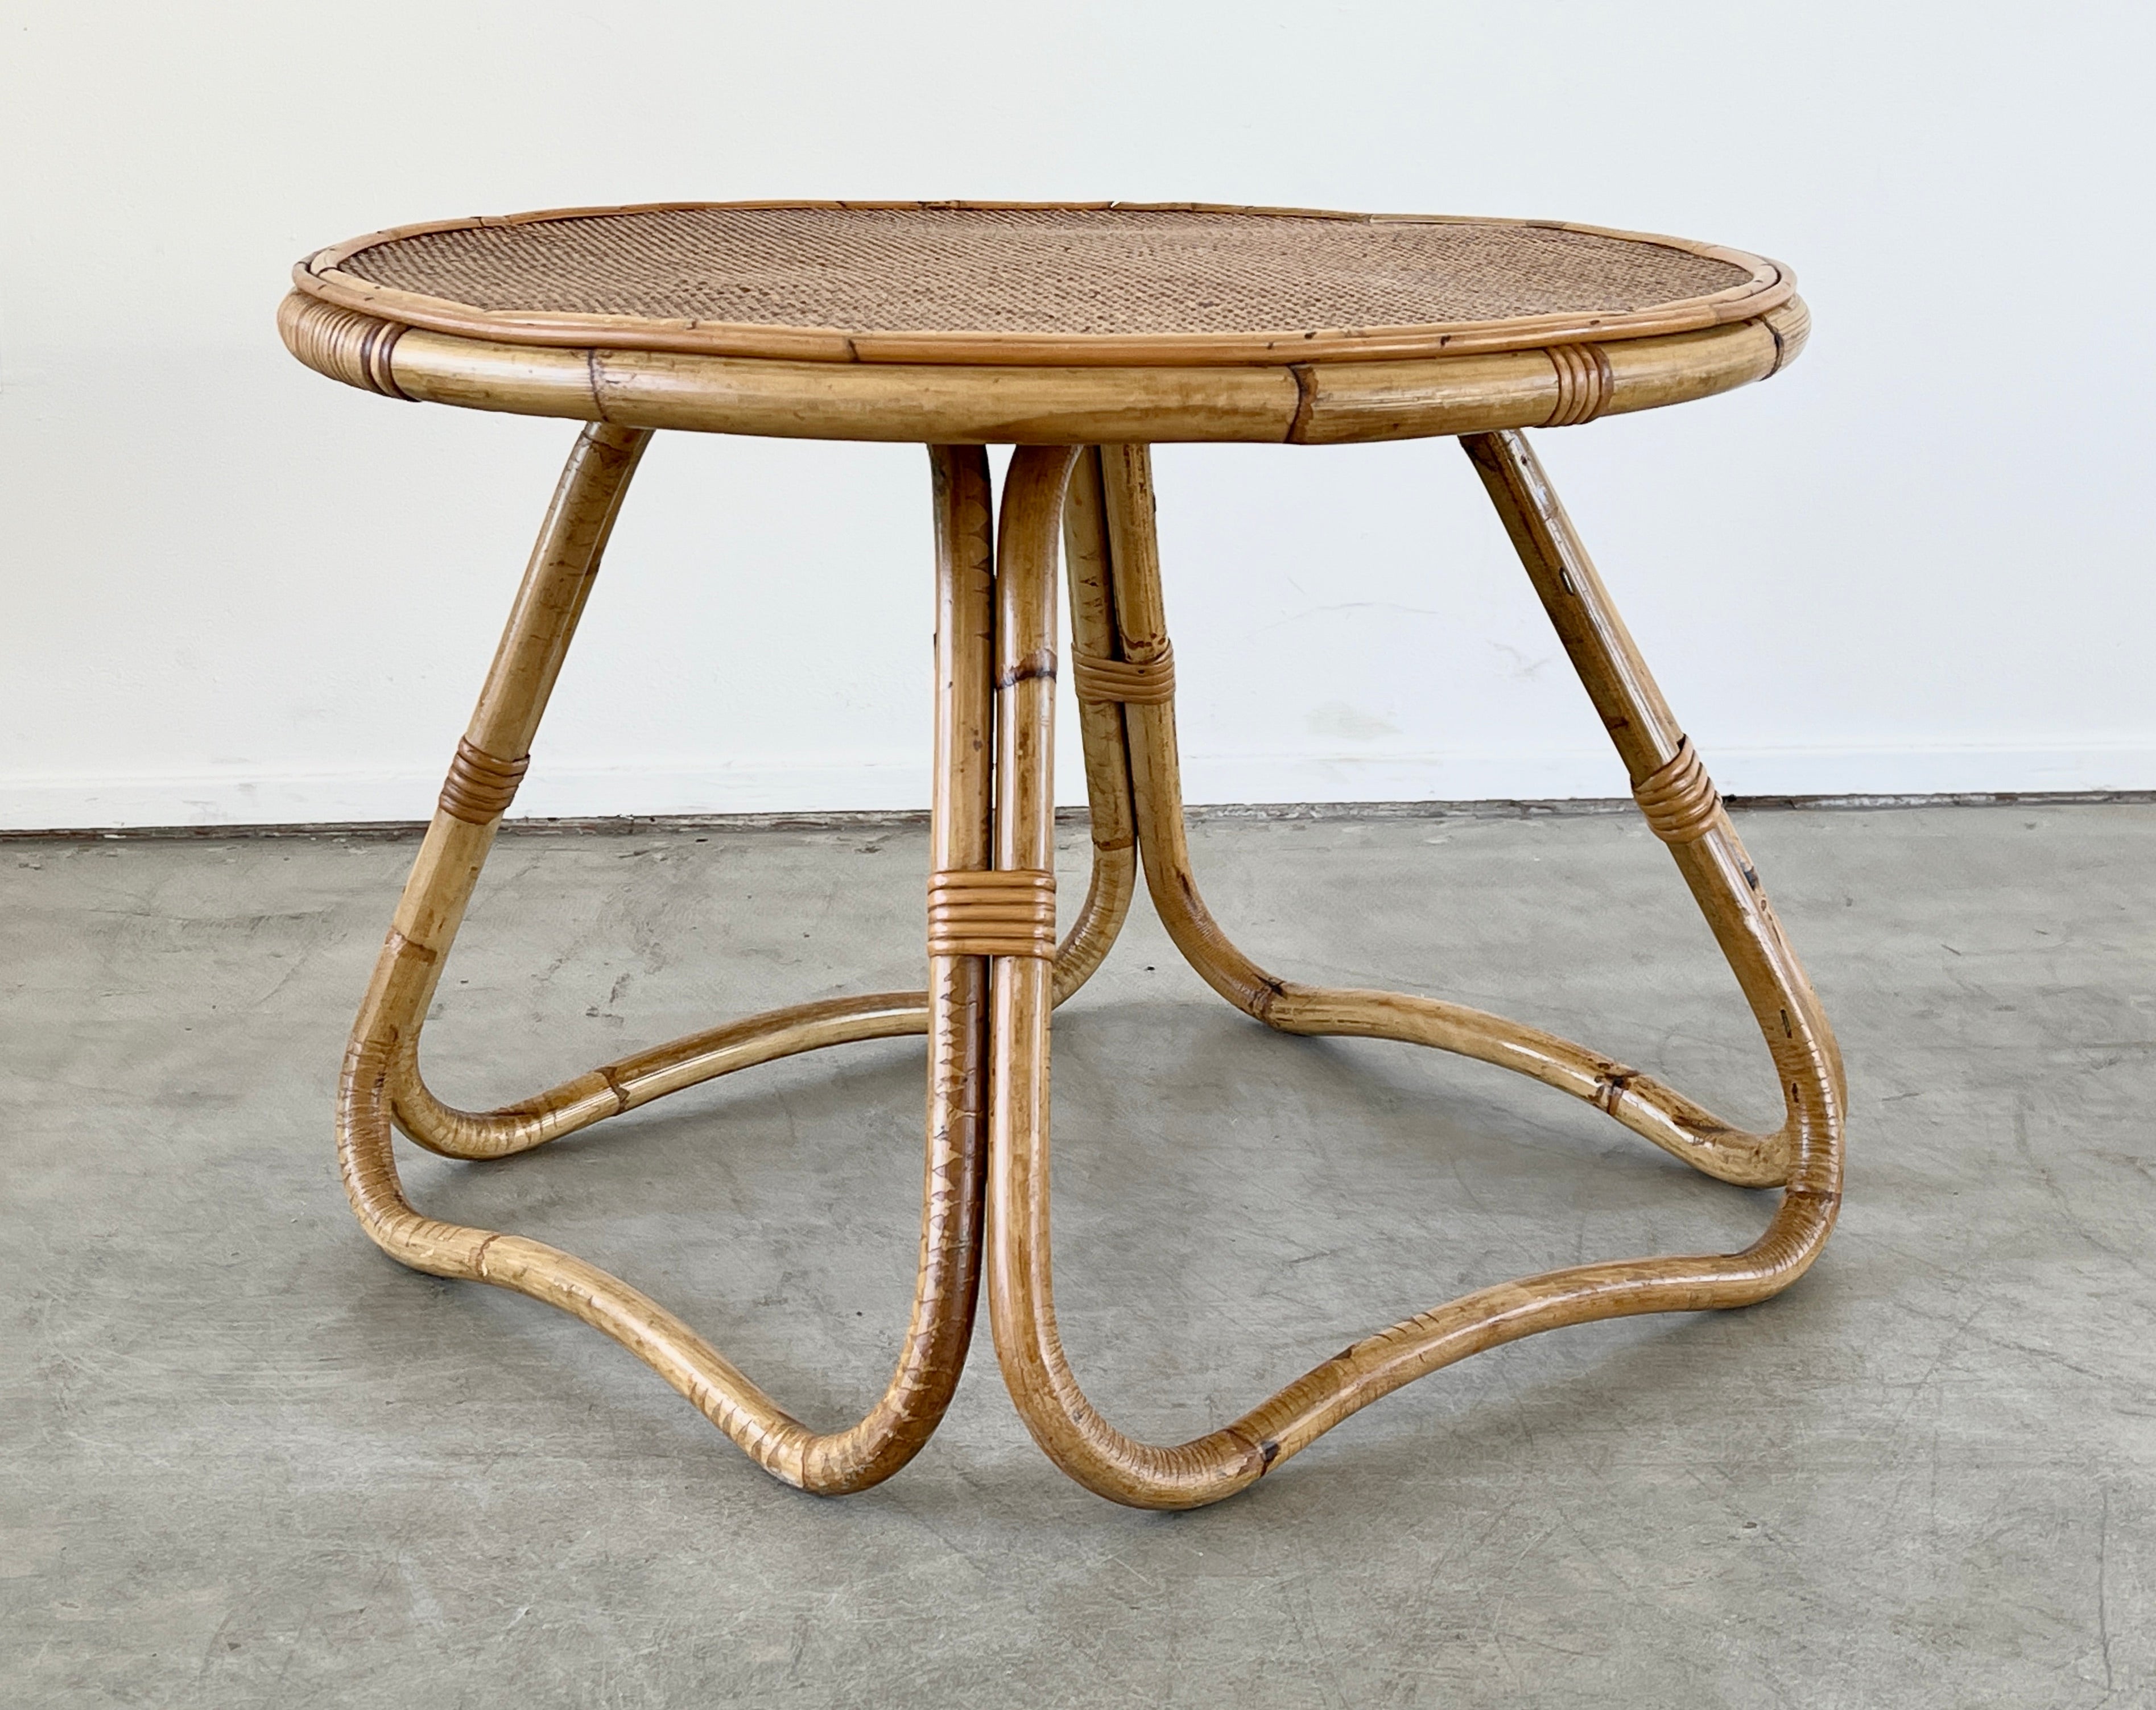 Round Italian bamboo and wicker coffee table with sculptural base and unique woven wicker top.